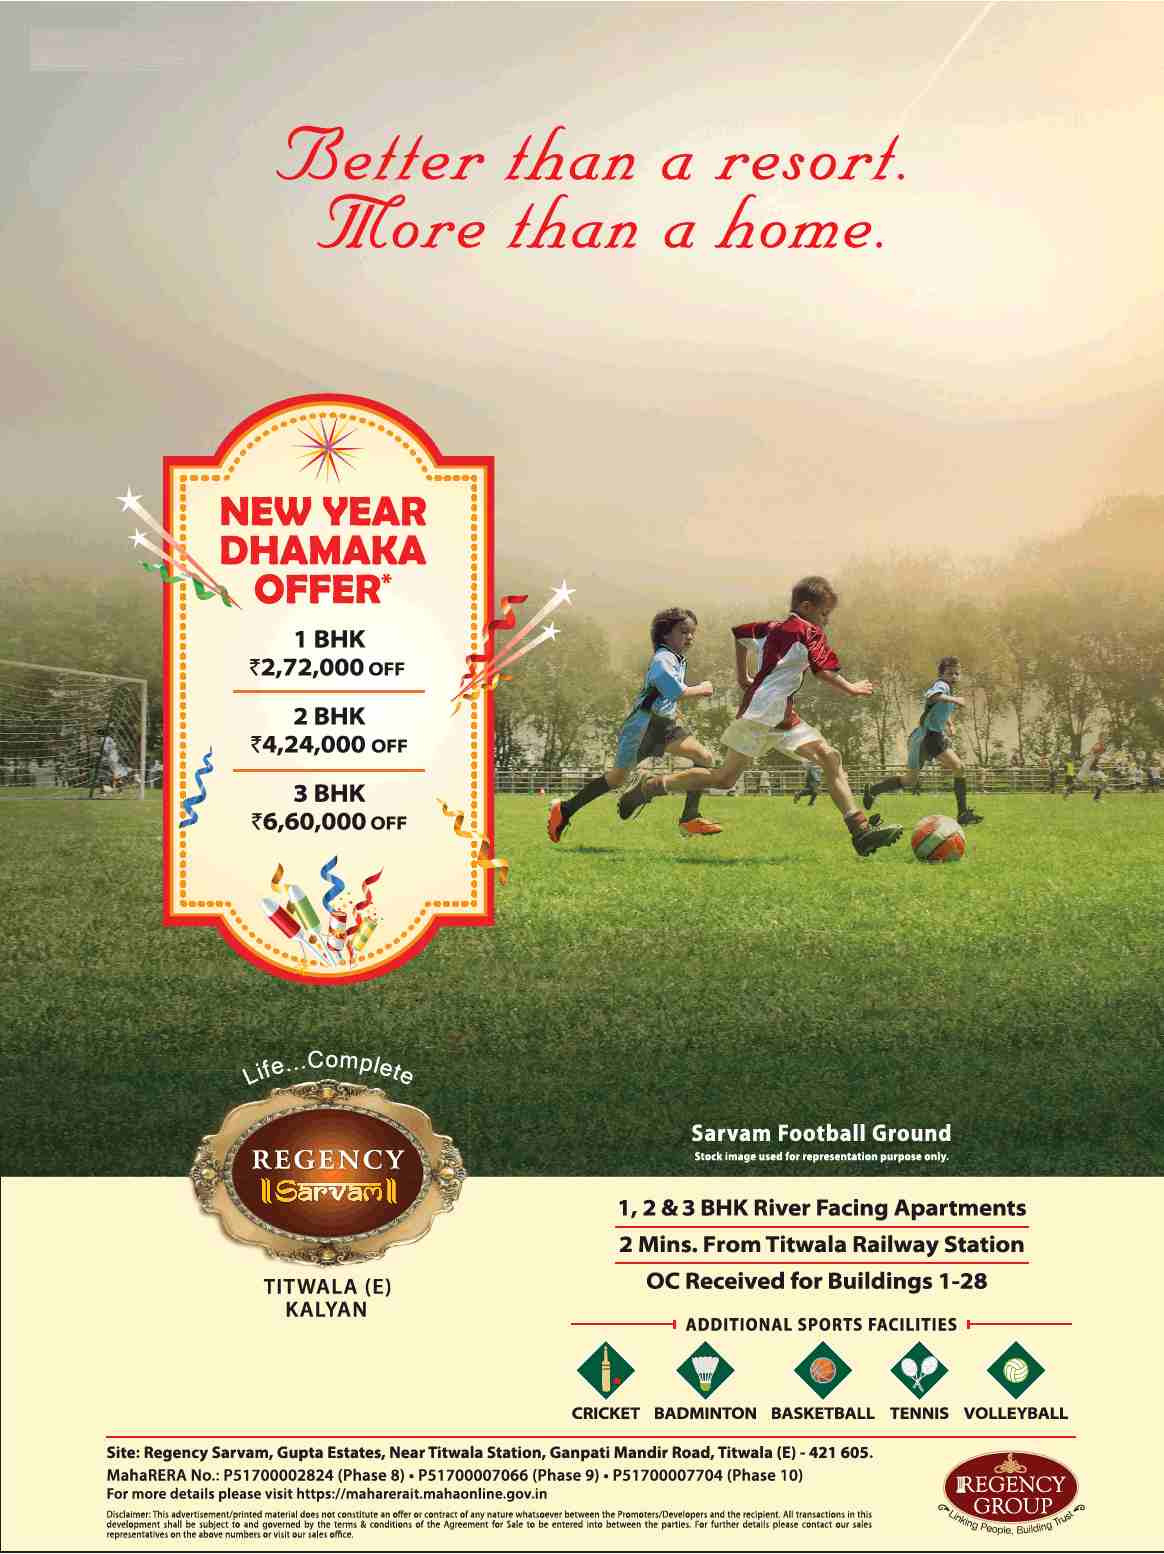 Avail the New Year offer at Regency Sarvam in Mumbai Update